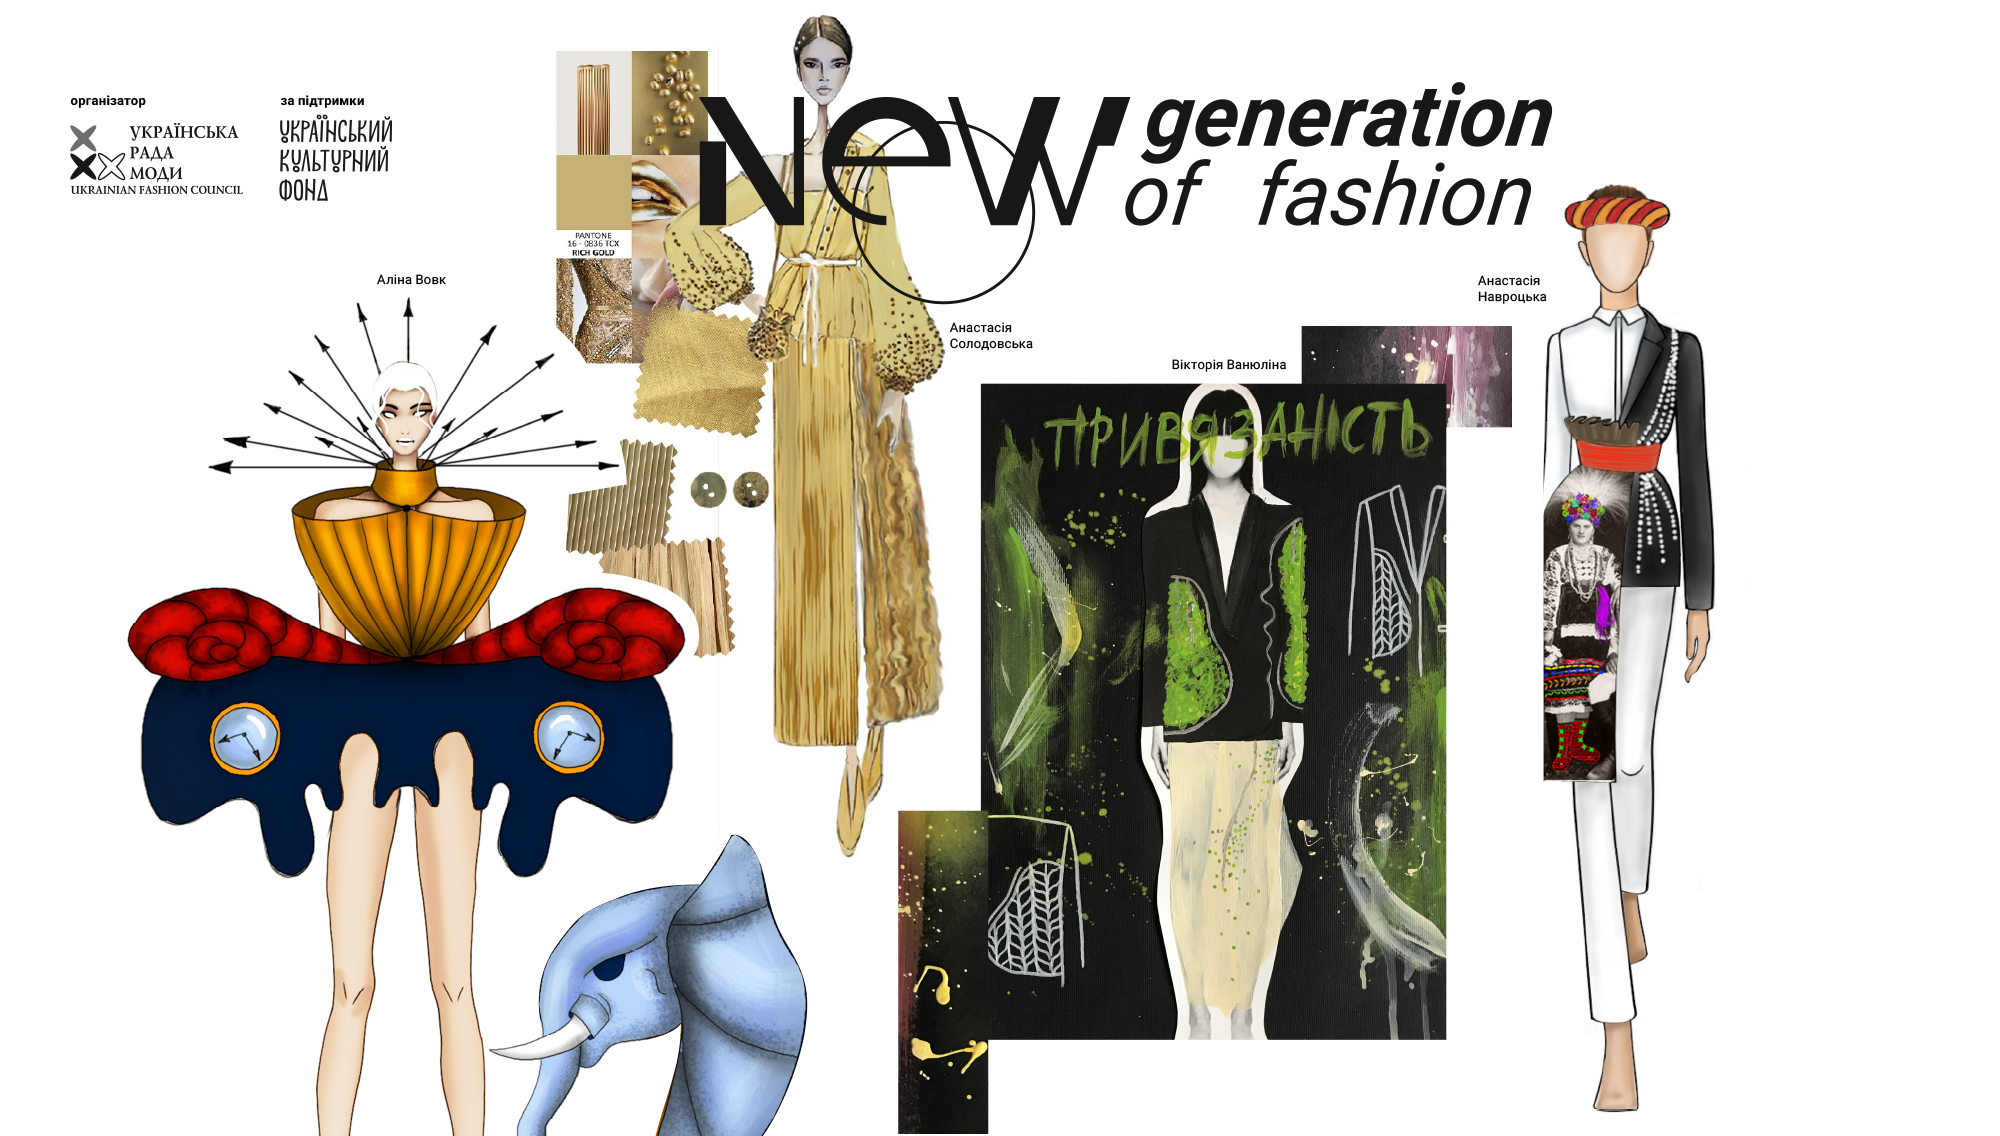 New Generation of Fashion – new vision of fashion concept